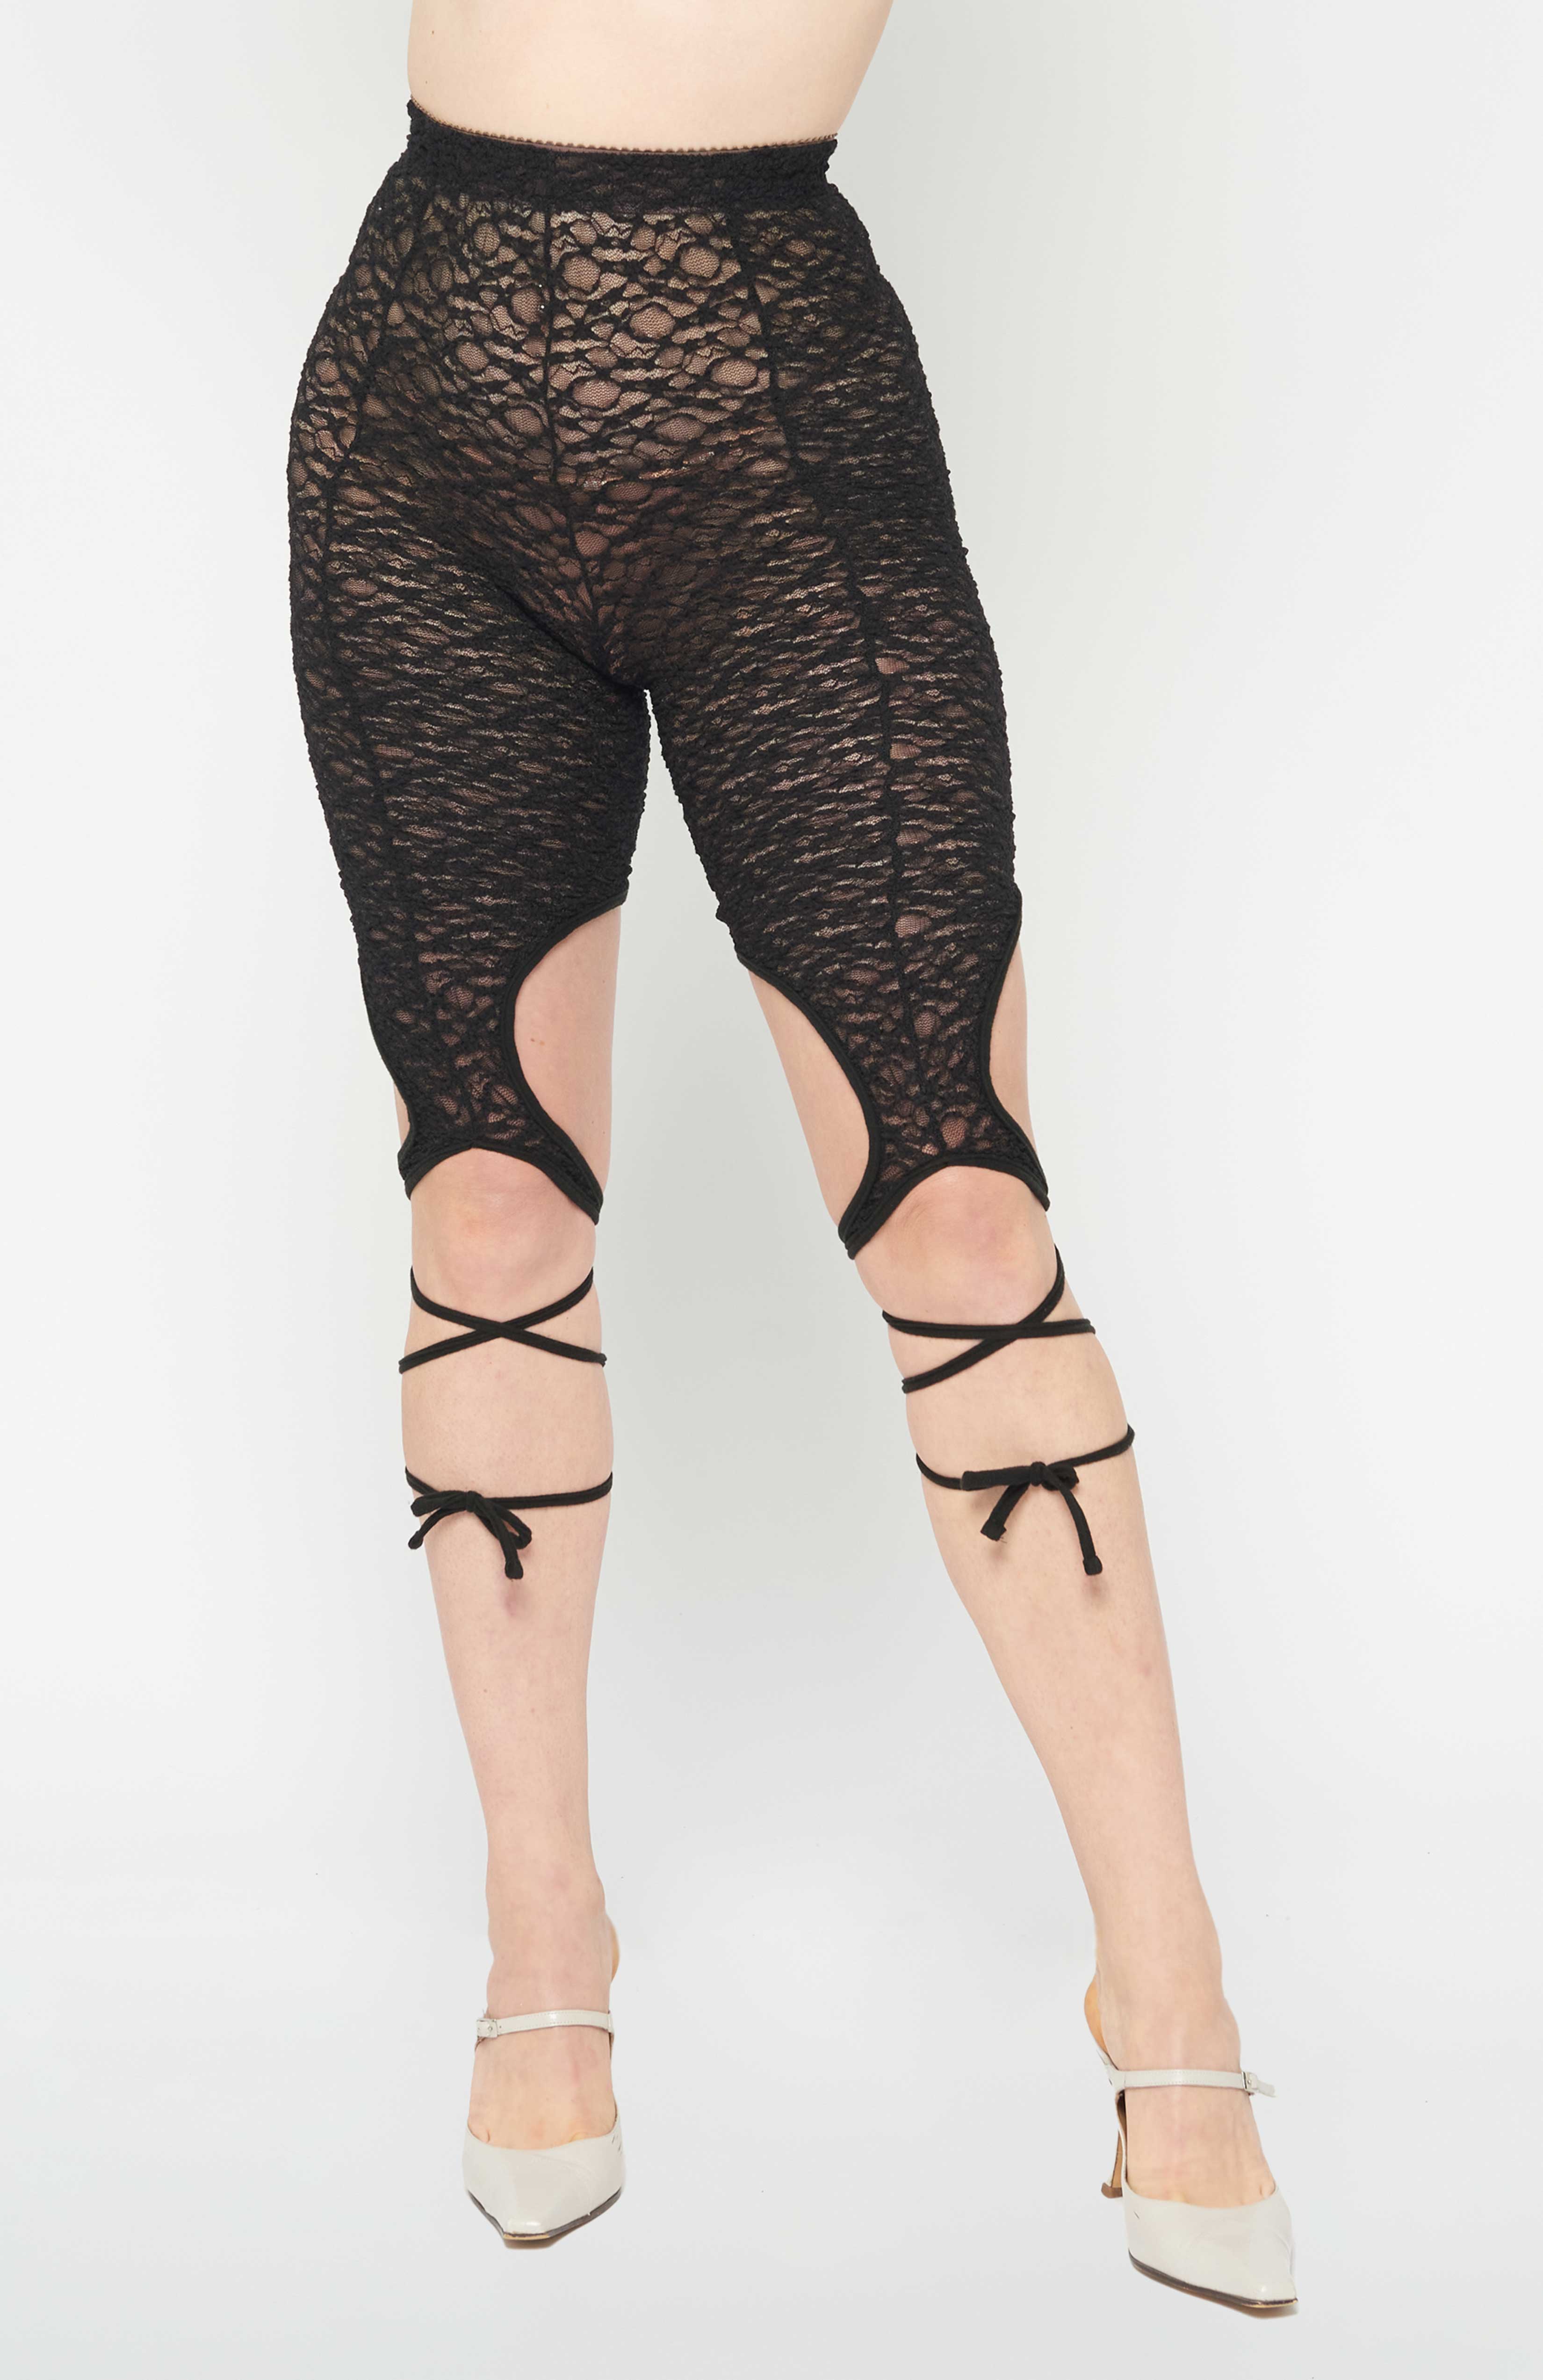 Maroske Peech High waisted black lace leggings with tendrils that grow from the knee. A spell is cast when these tendrils are wrapped around your legs and tied. Super comfortable and stretchy with a brushed elastic waistband.